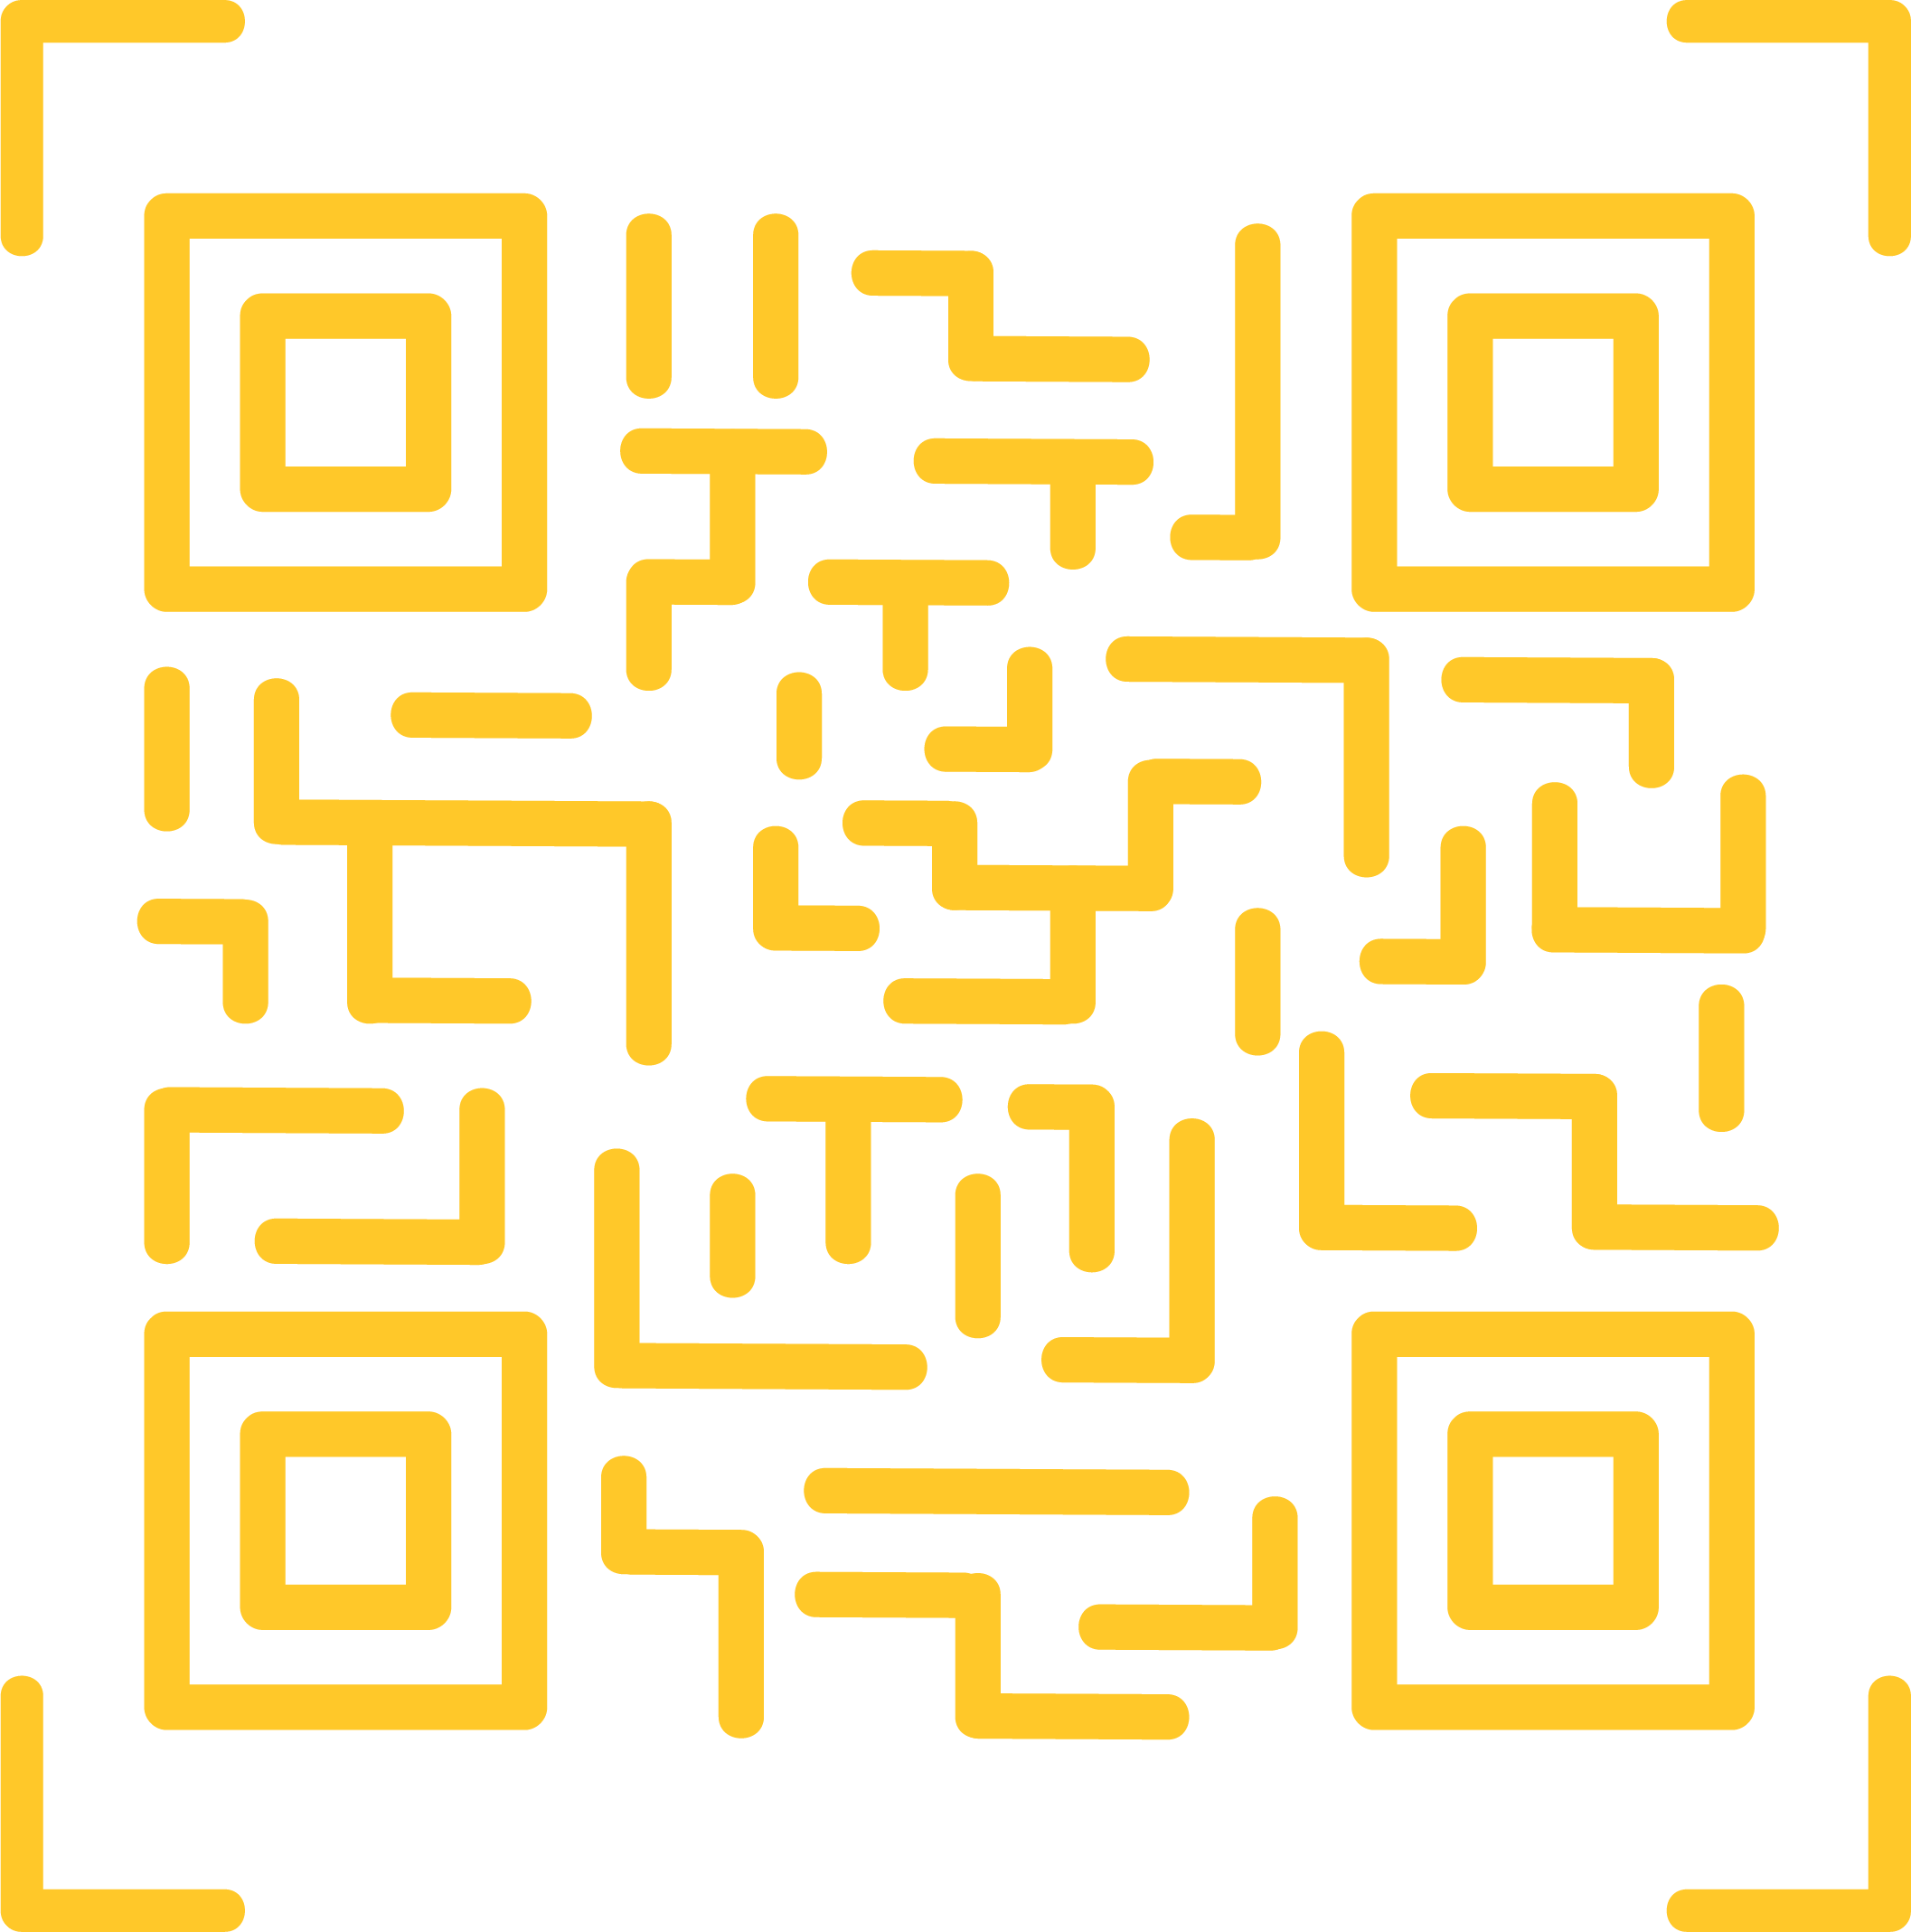 https://www.concordparking.com/wp-content/uploads/2022/09/SMRTpass-qr-code-icon.png